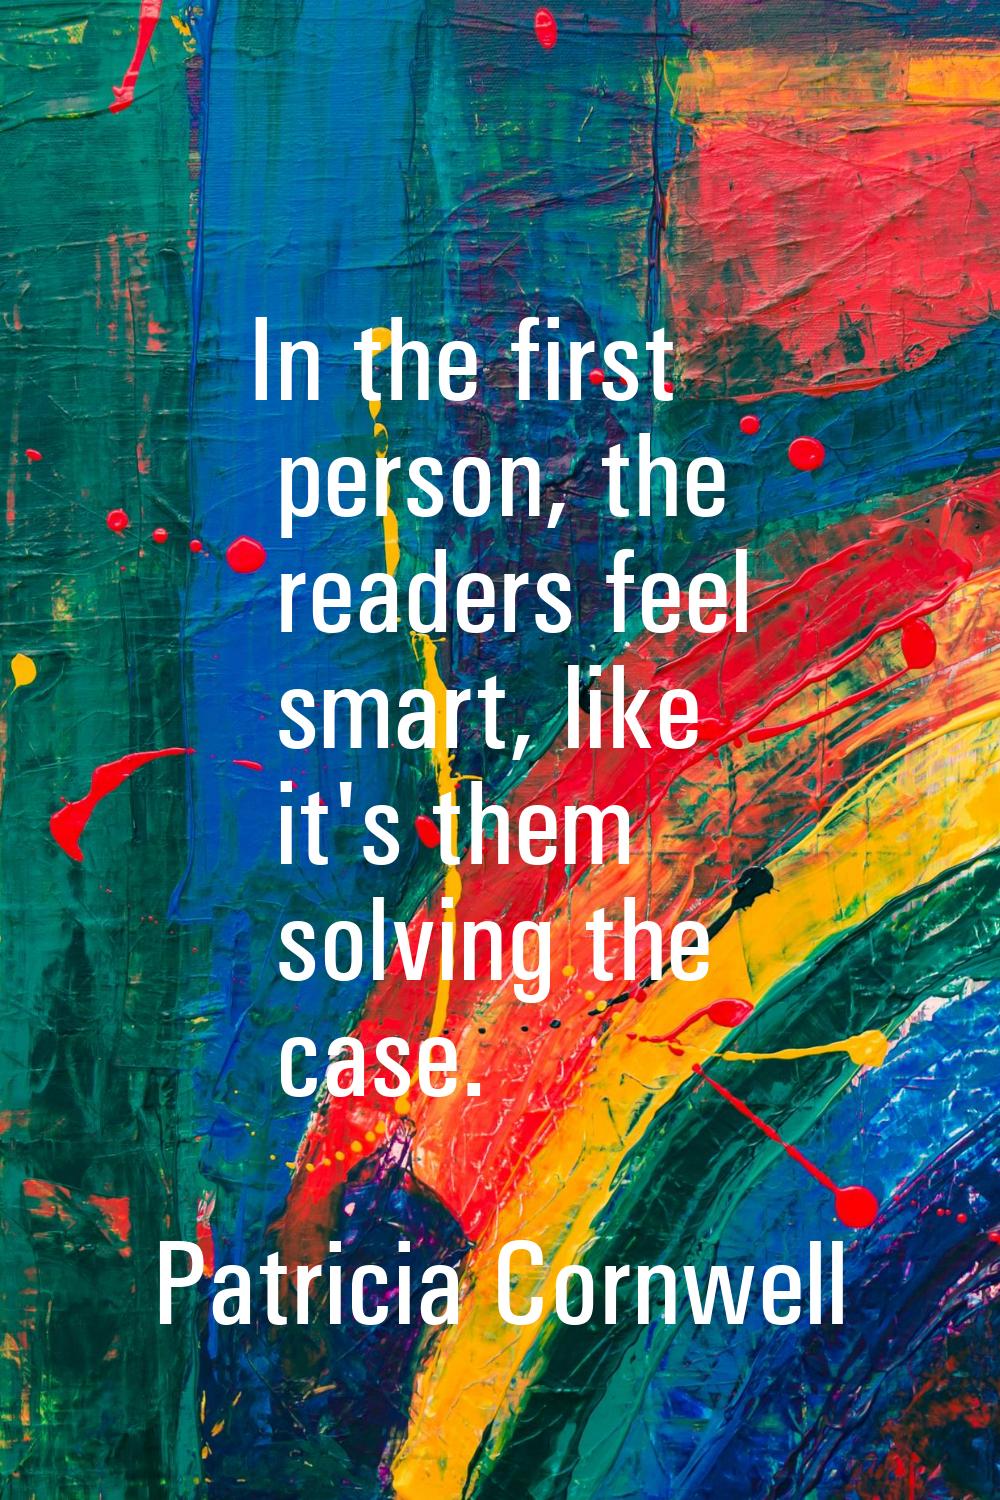 In the first person, the readers feel smart, like it's them solving the case.